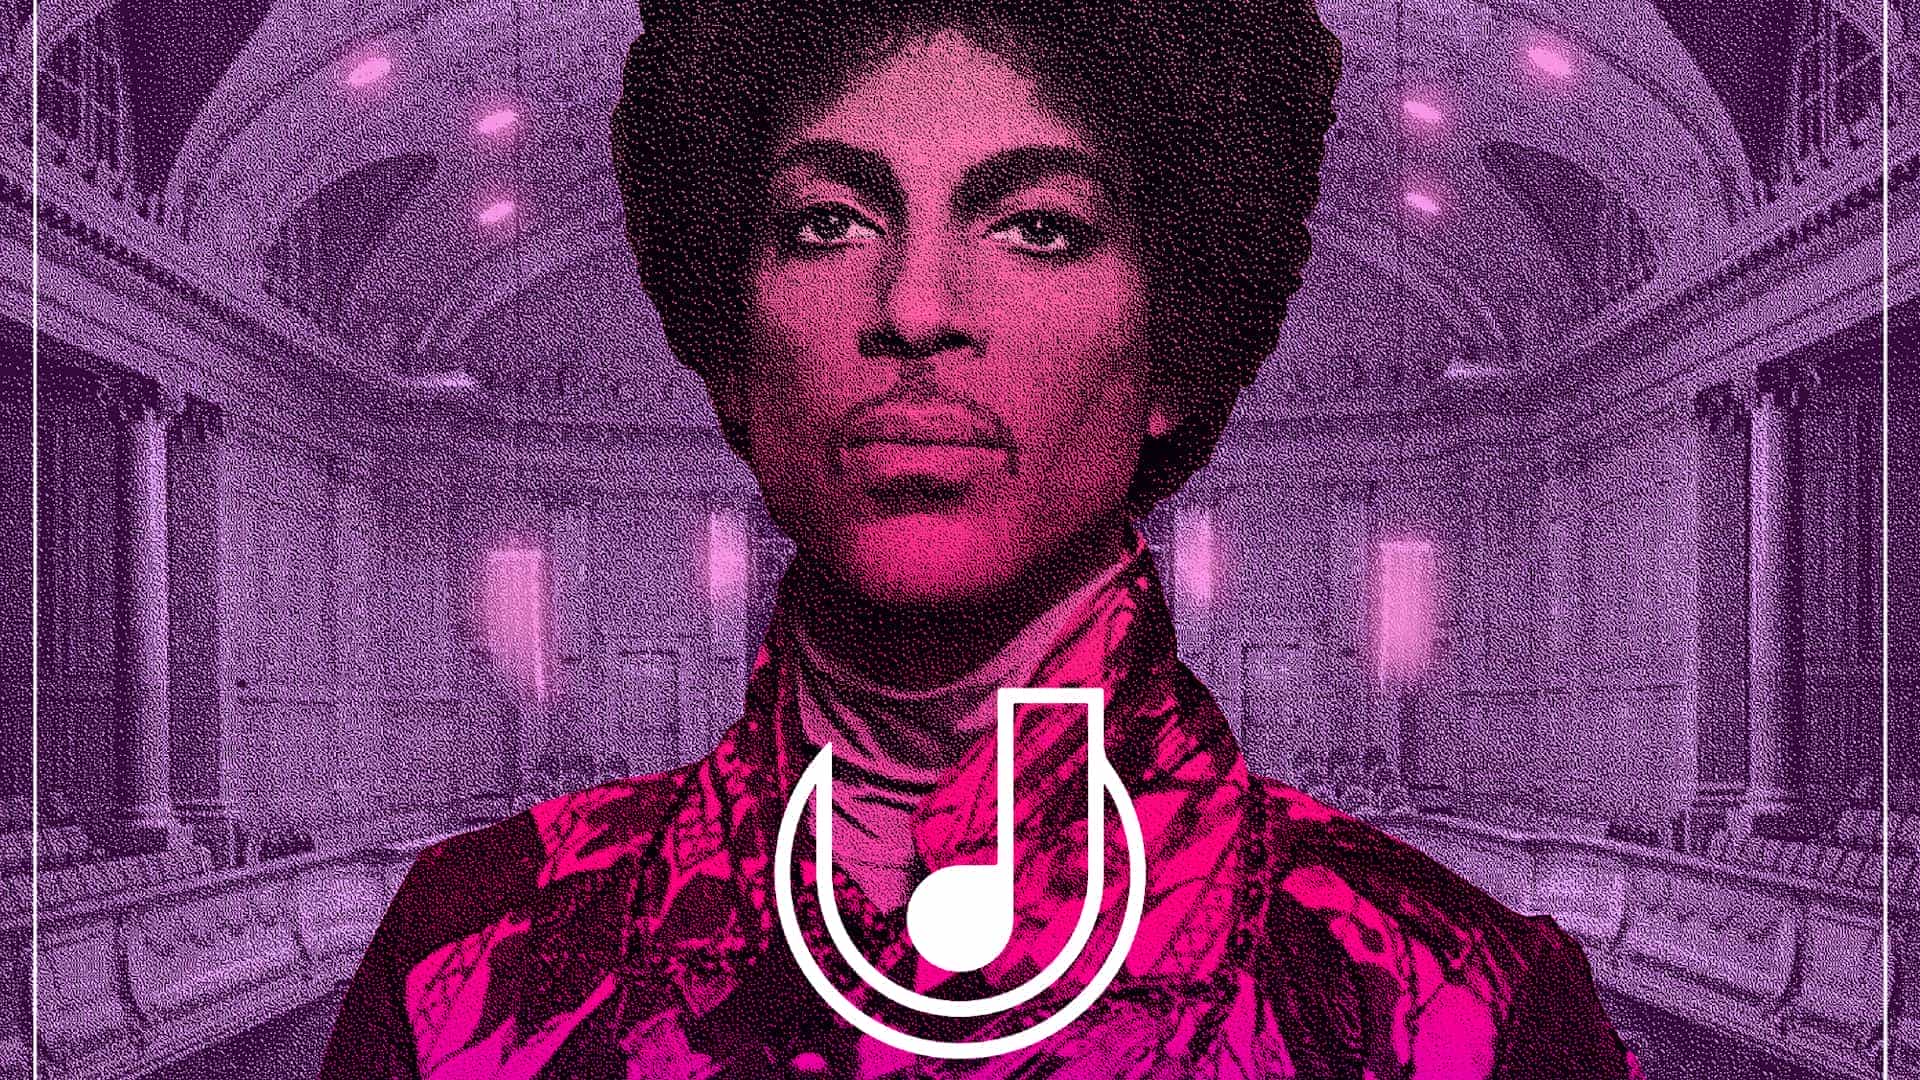 The Untold Orchestra - Prince: An Orchestral Rendition